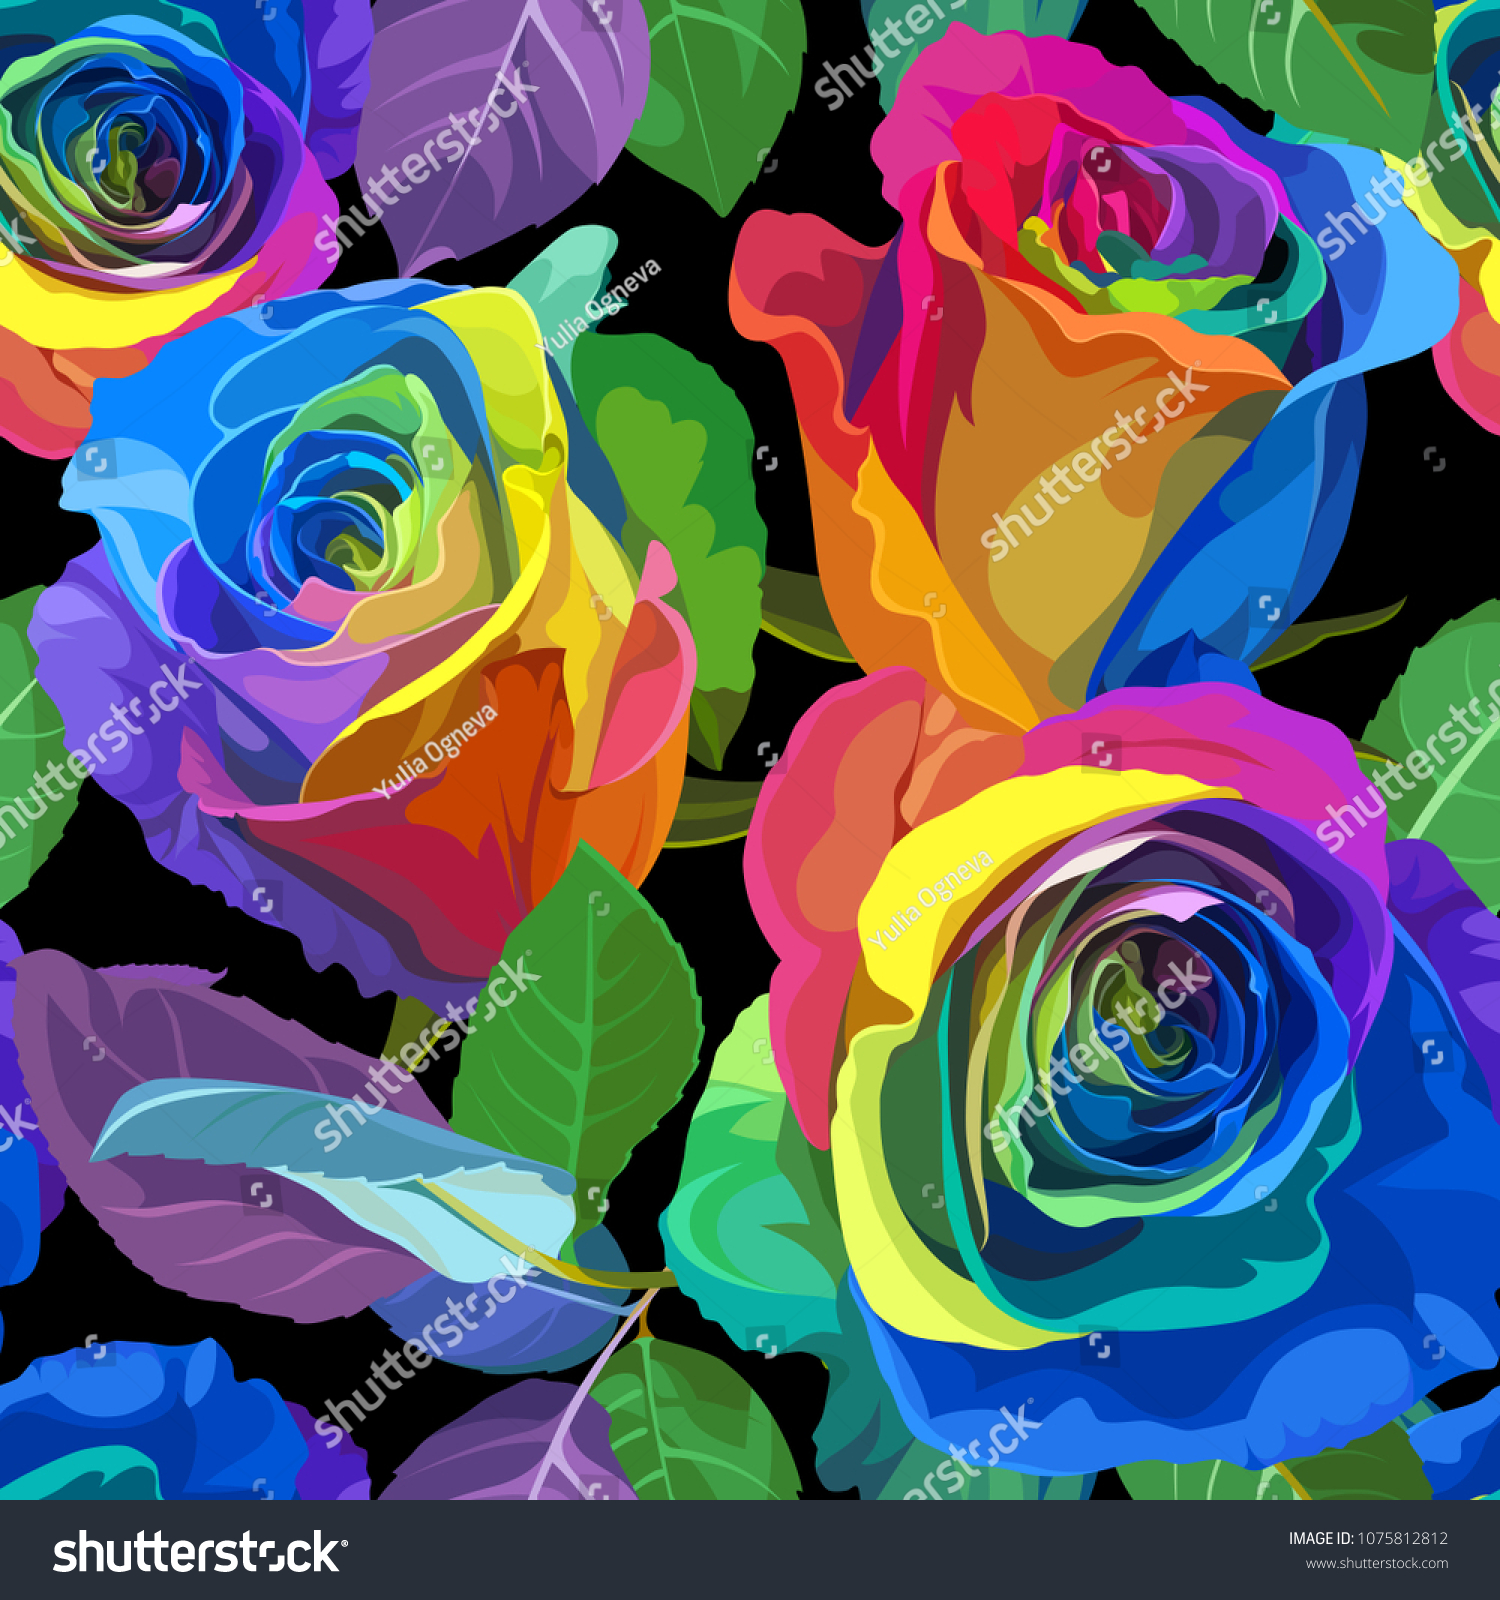 Seamless Pattern - Multicolored Roses on Black Background.